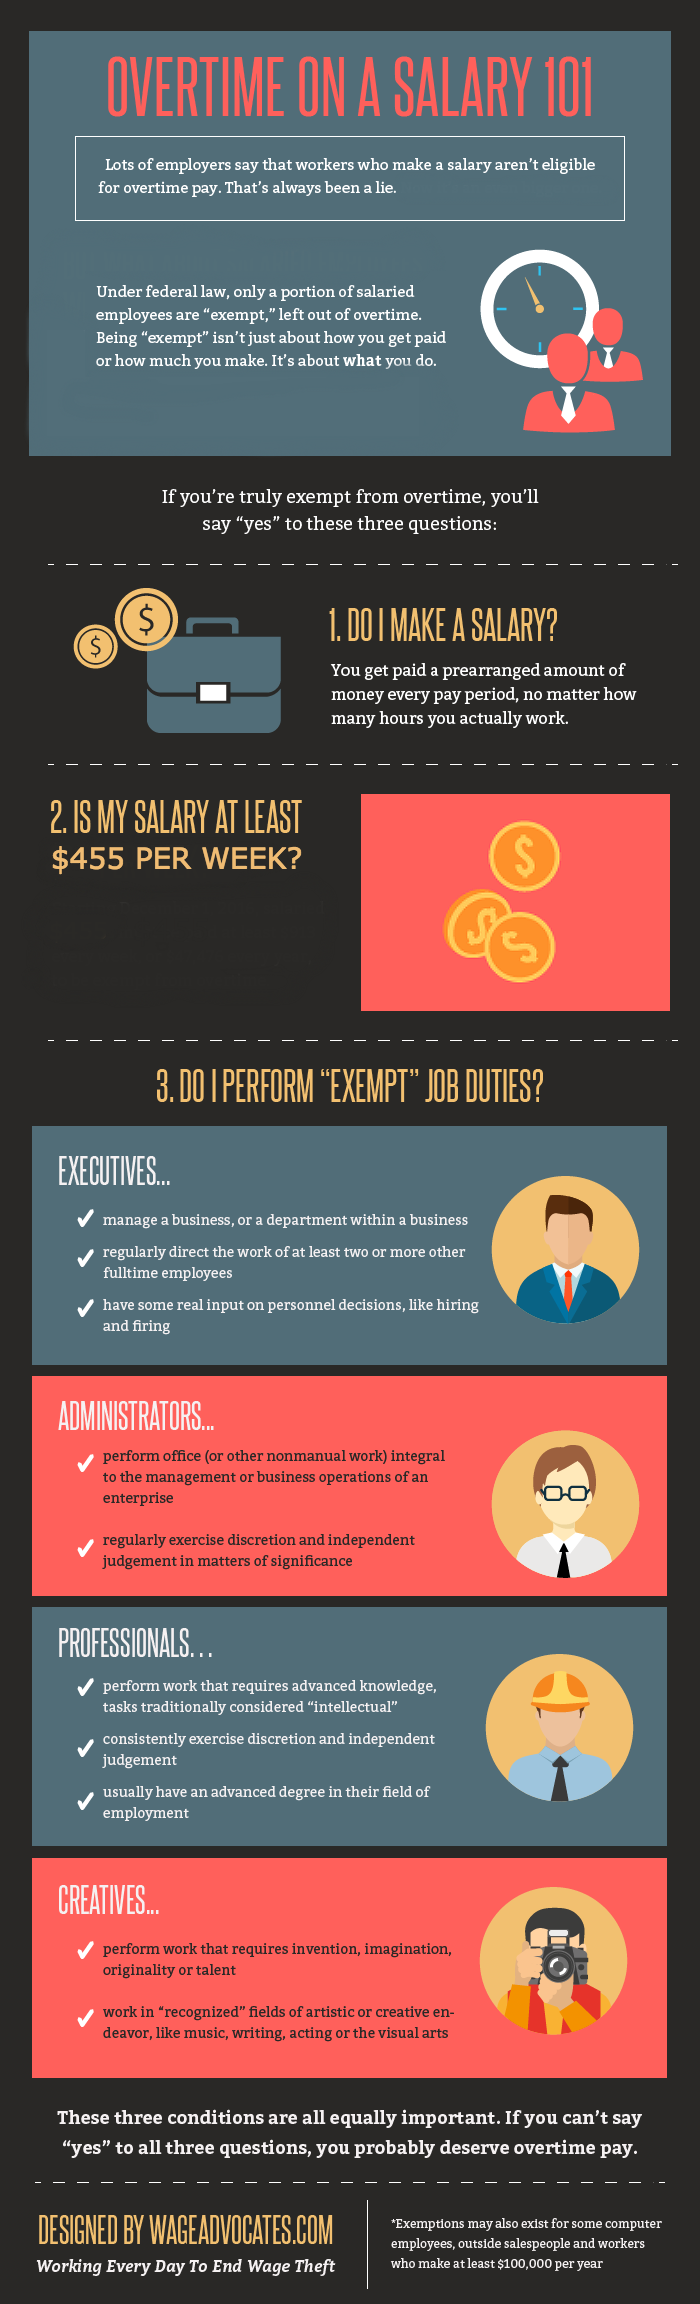 Obama Overtime Rule Infographic